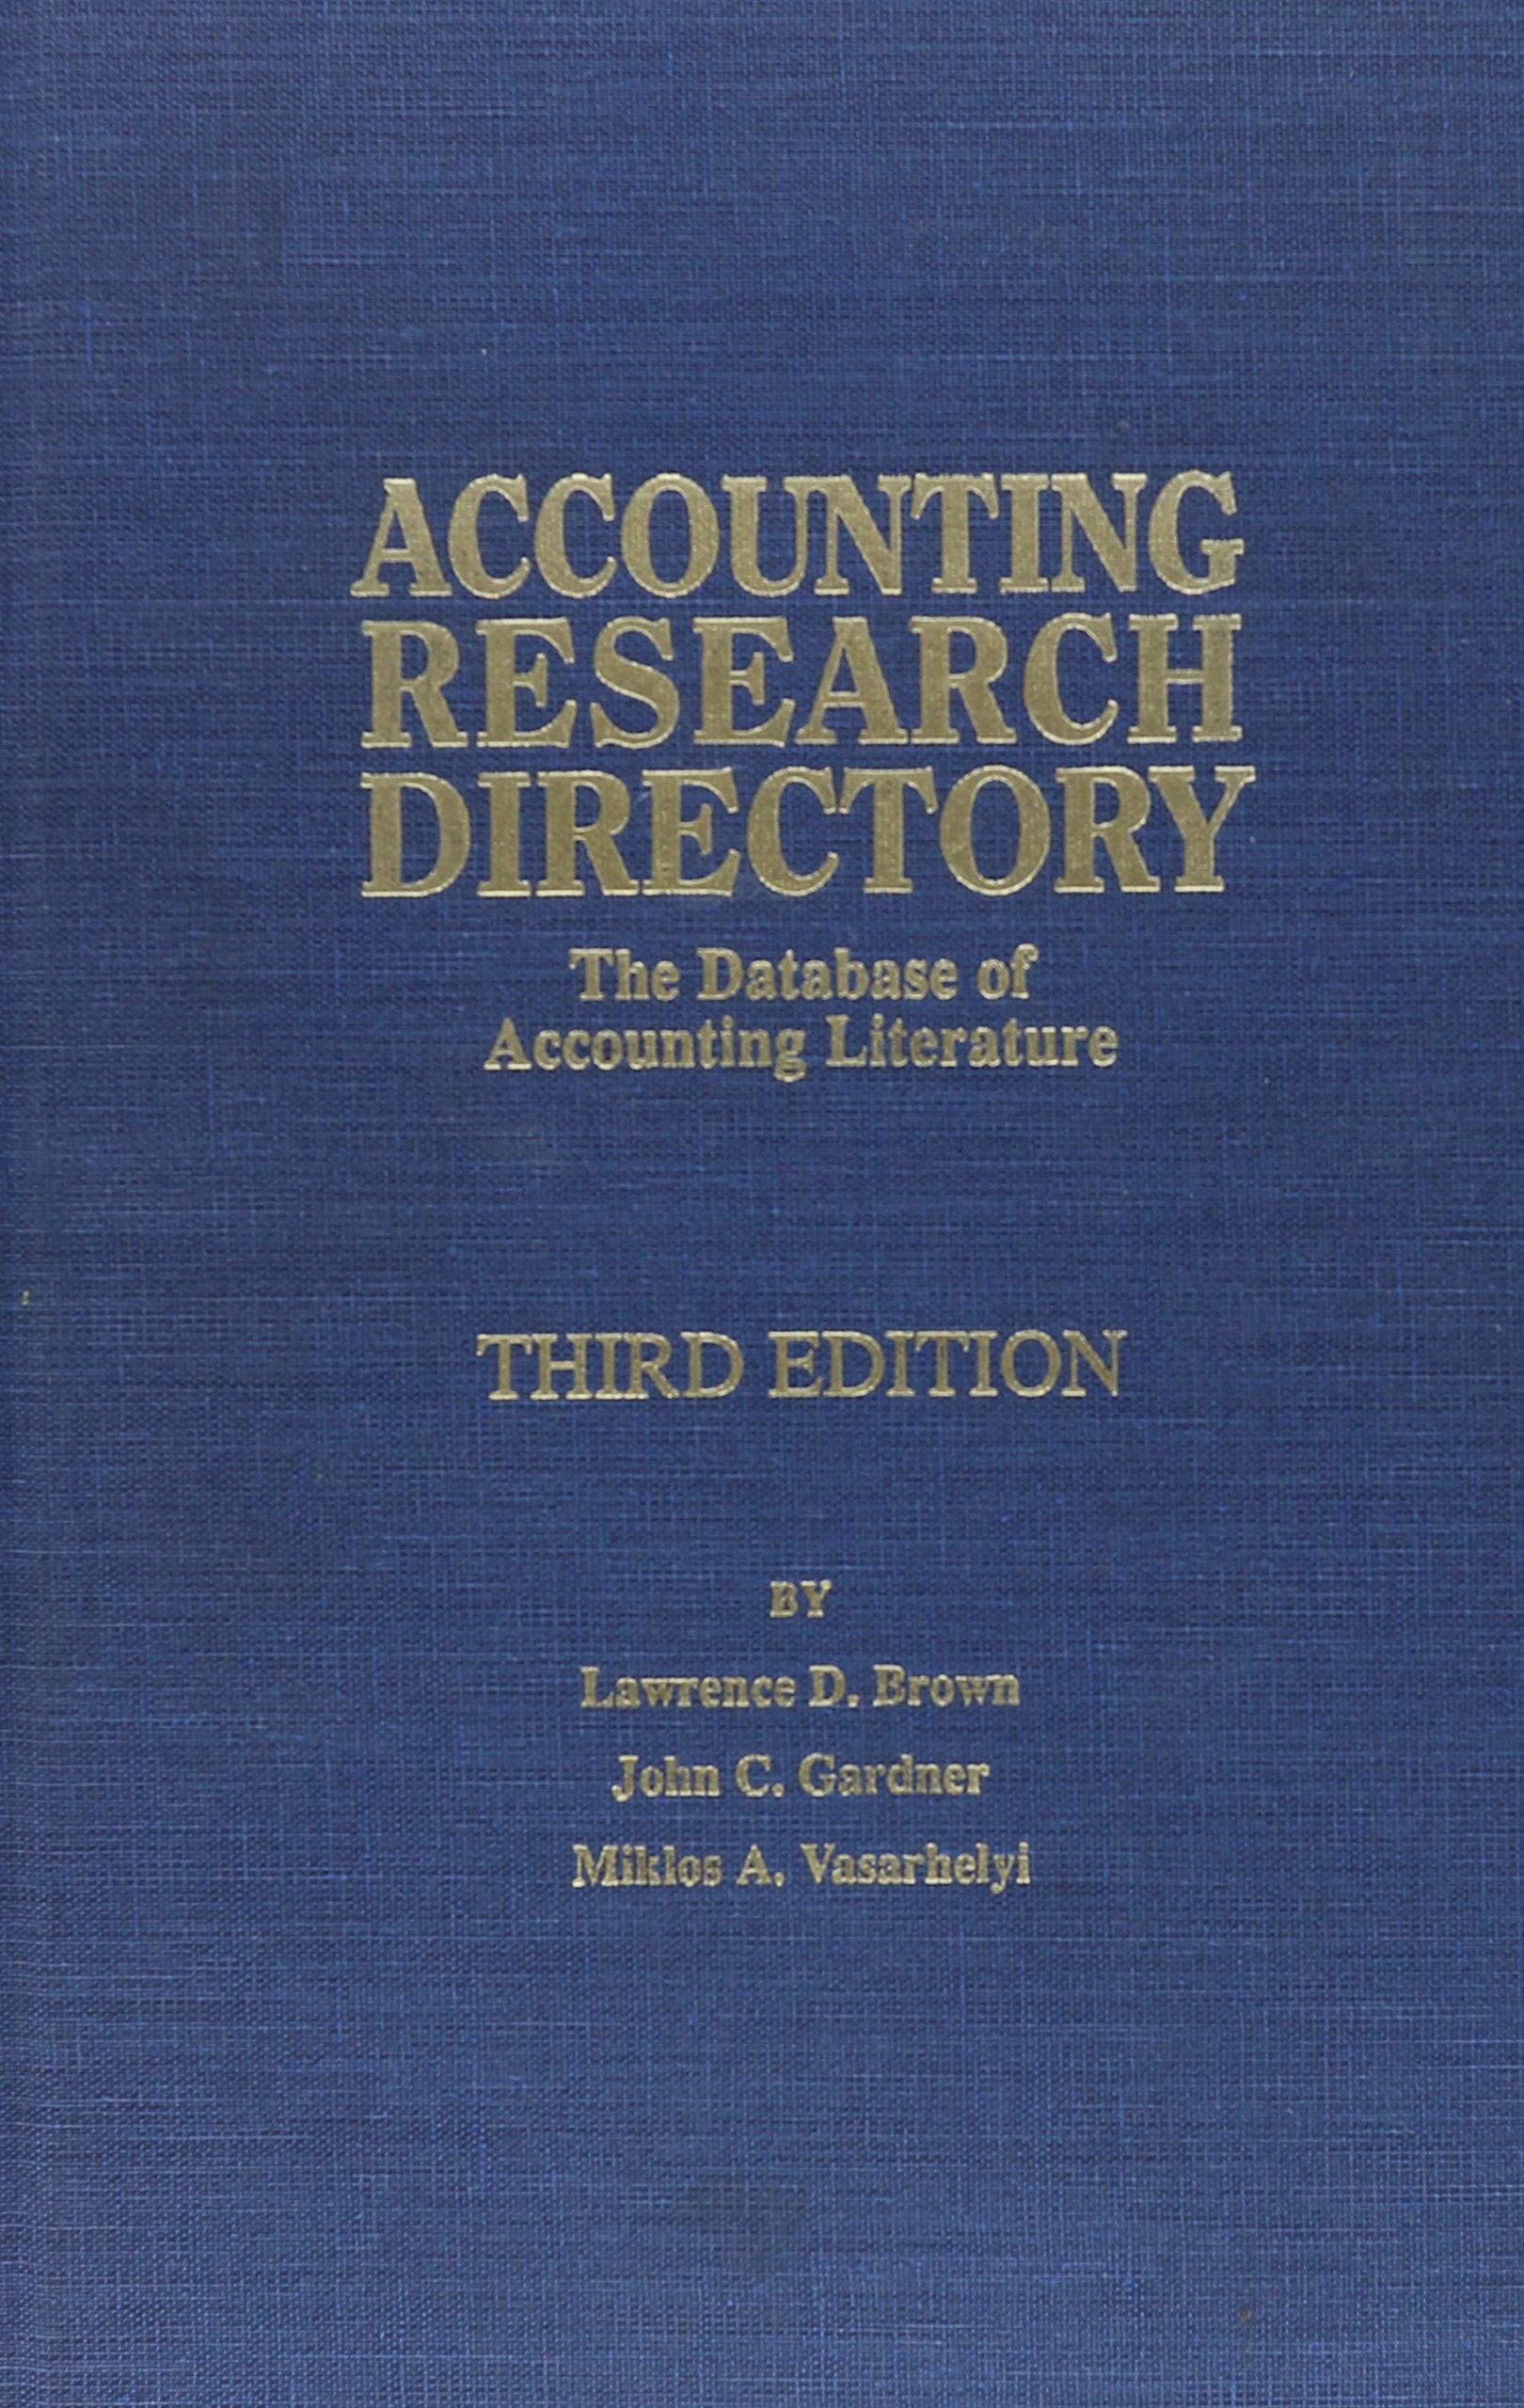 accounting research directory the database of accounting literature 3rd edition lawrence d. brown, john c.